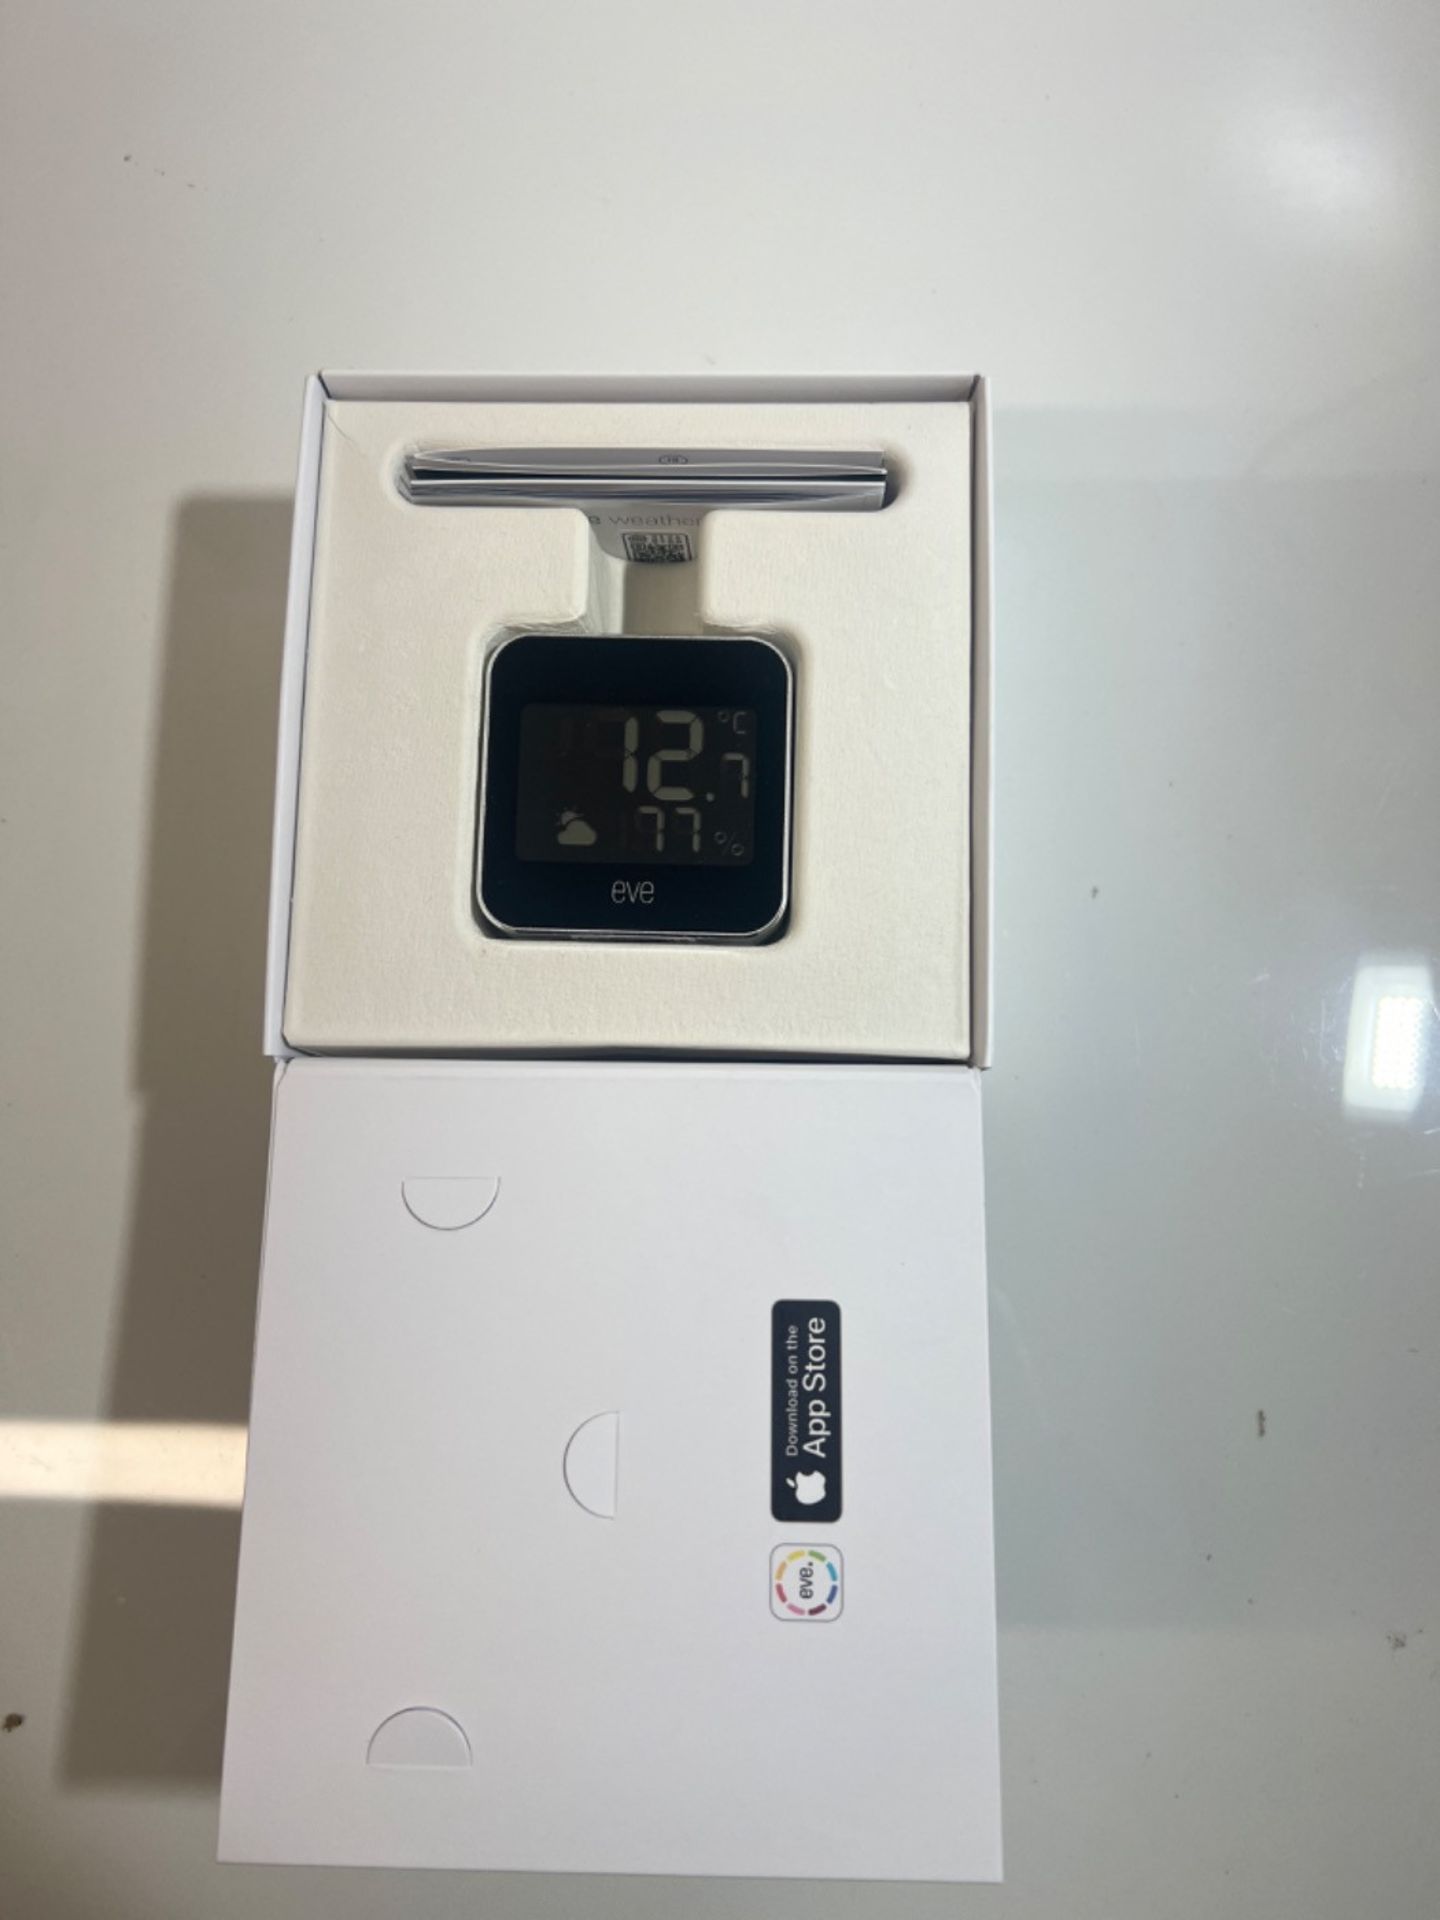 Eve Weather - Connected Weather Station wit Apple HomeKit technology for tracking temperature, humi - Image 2 of 2